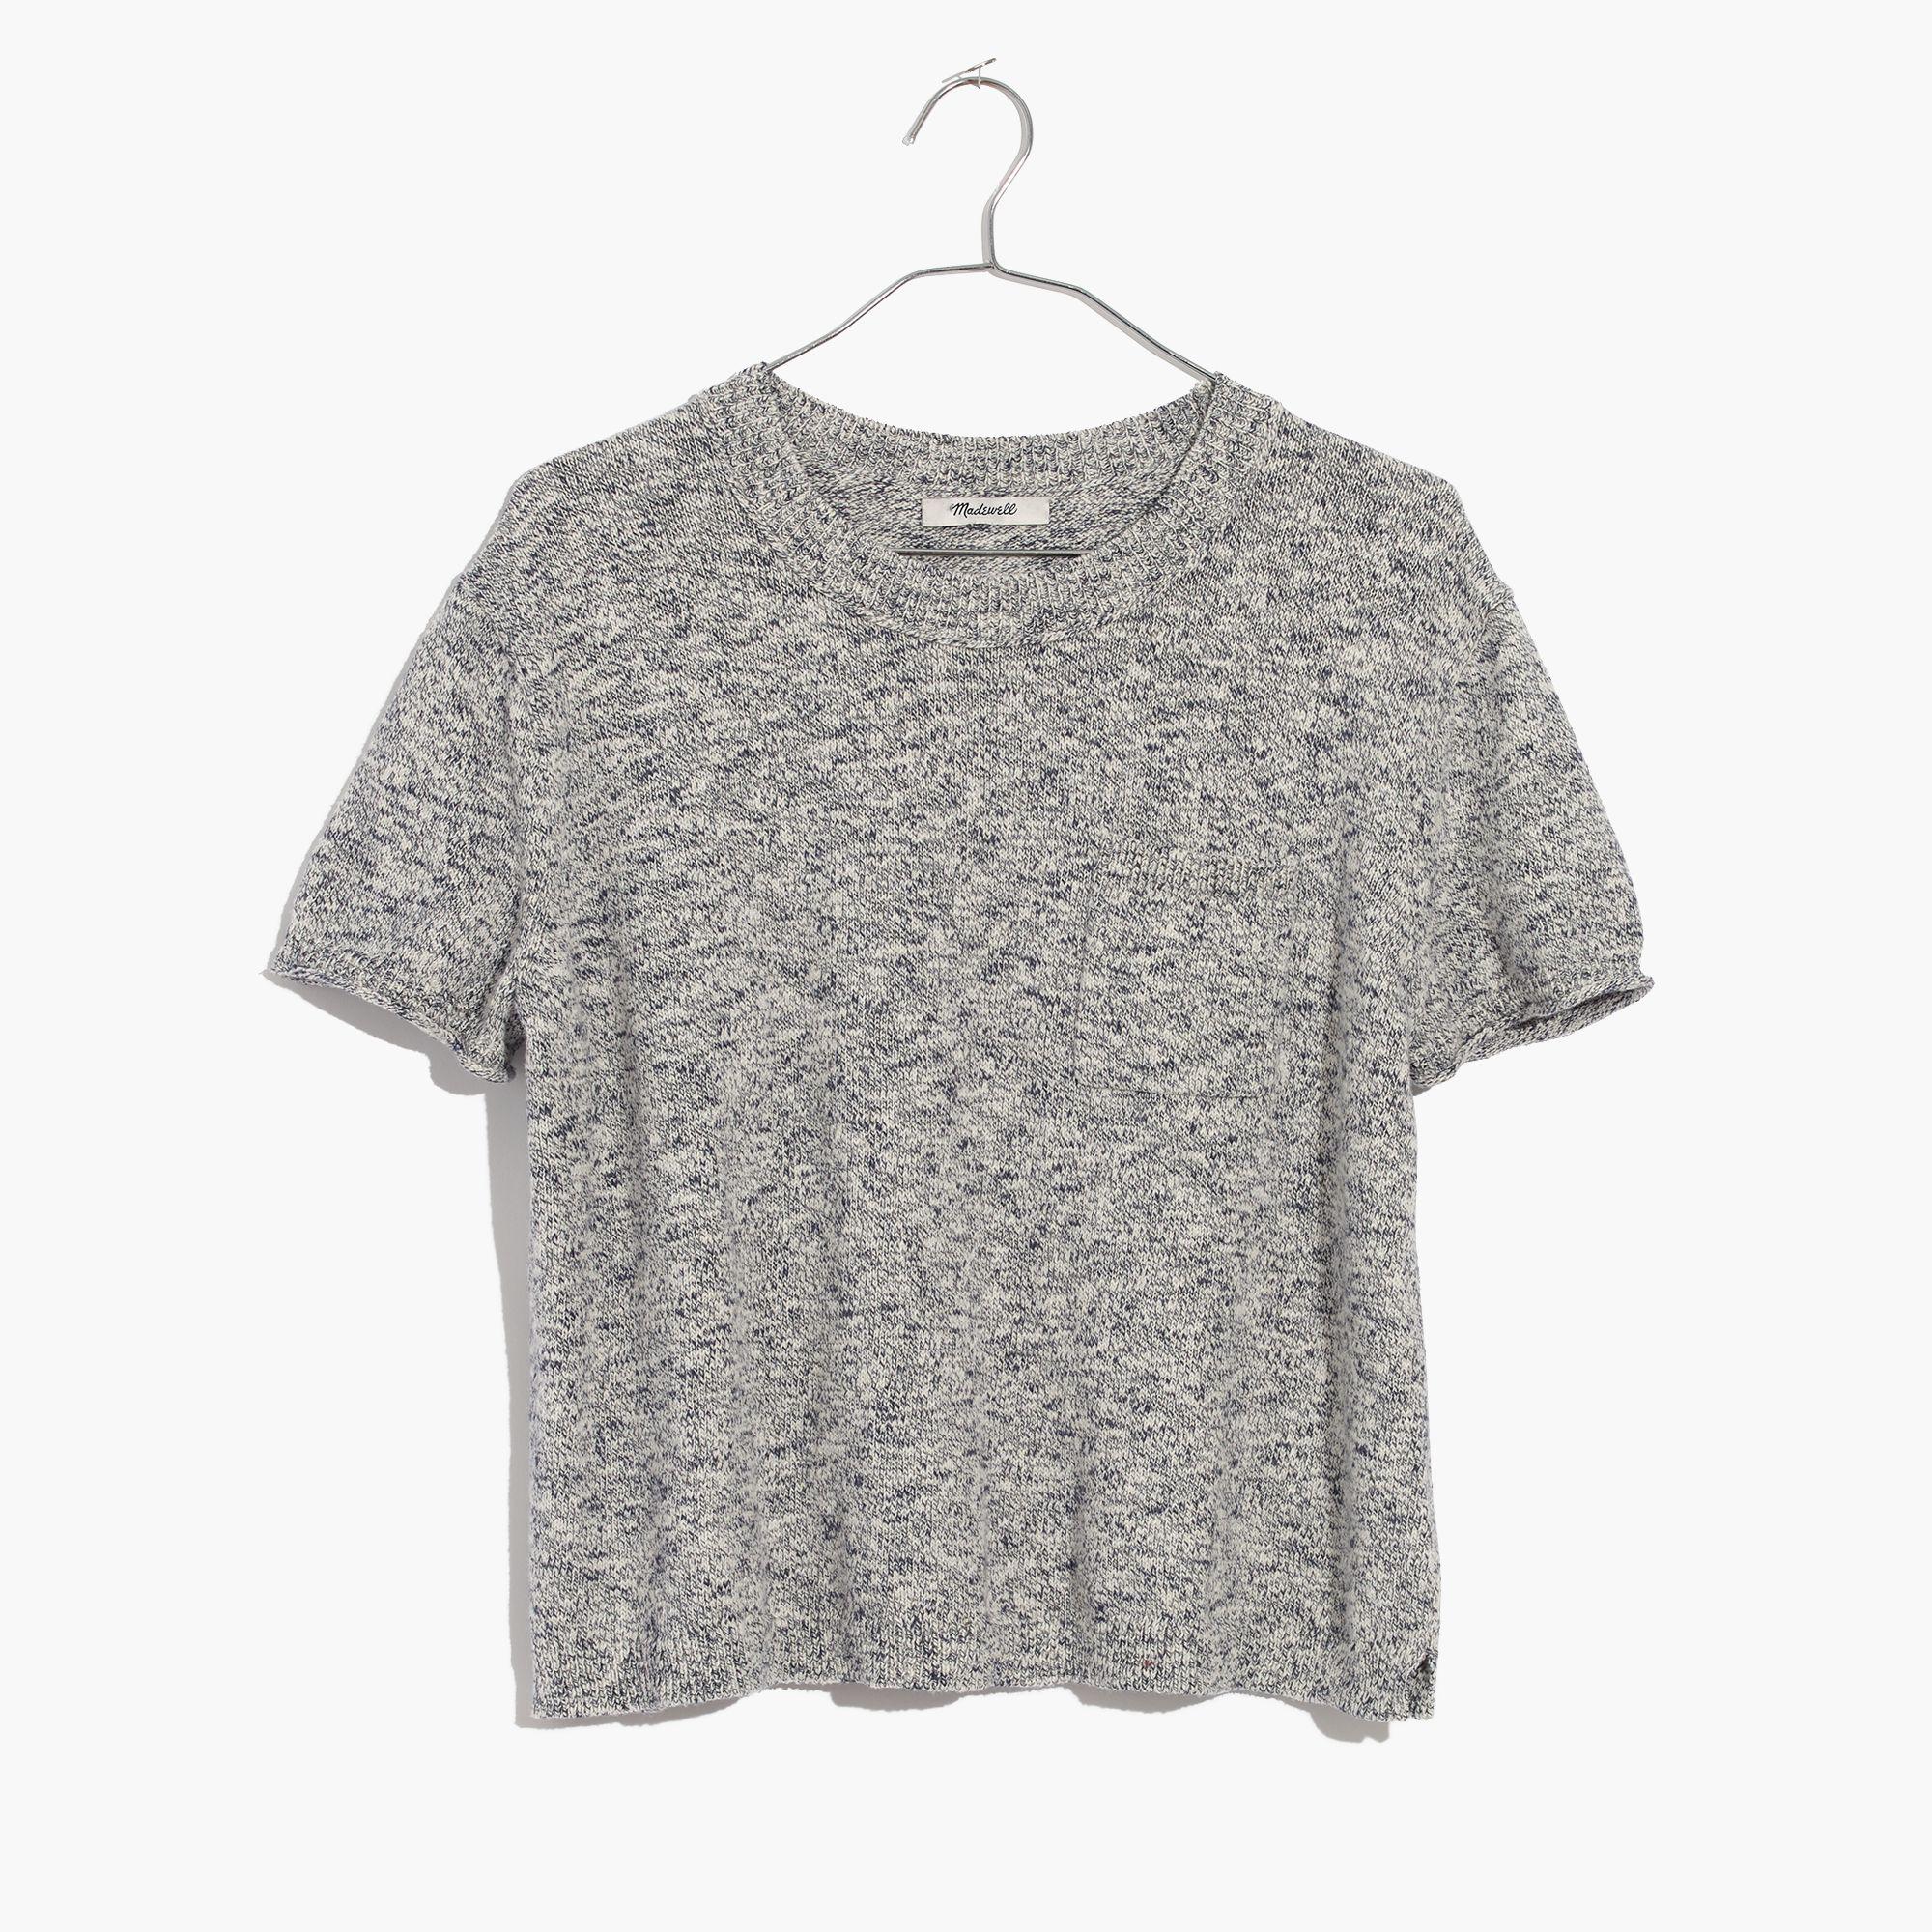 Lyst - Madewell Pocket Tee Sweater in Gray